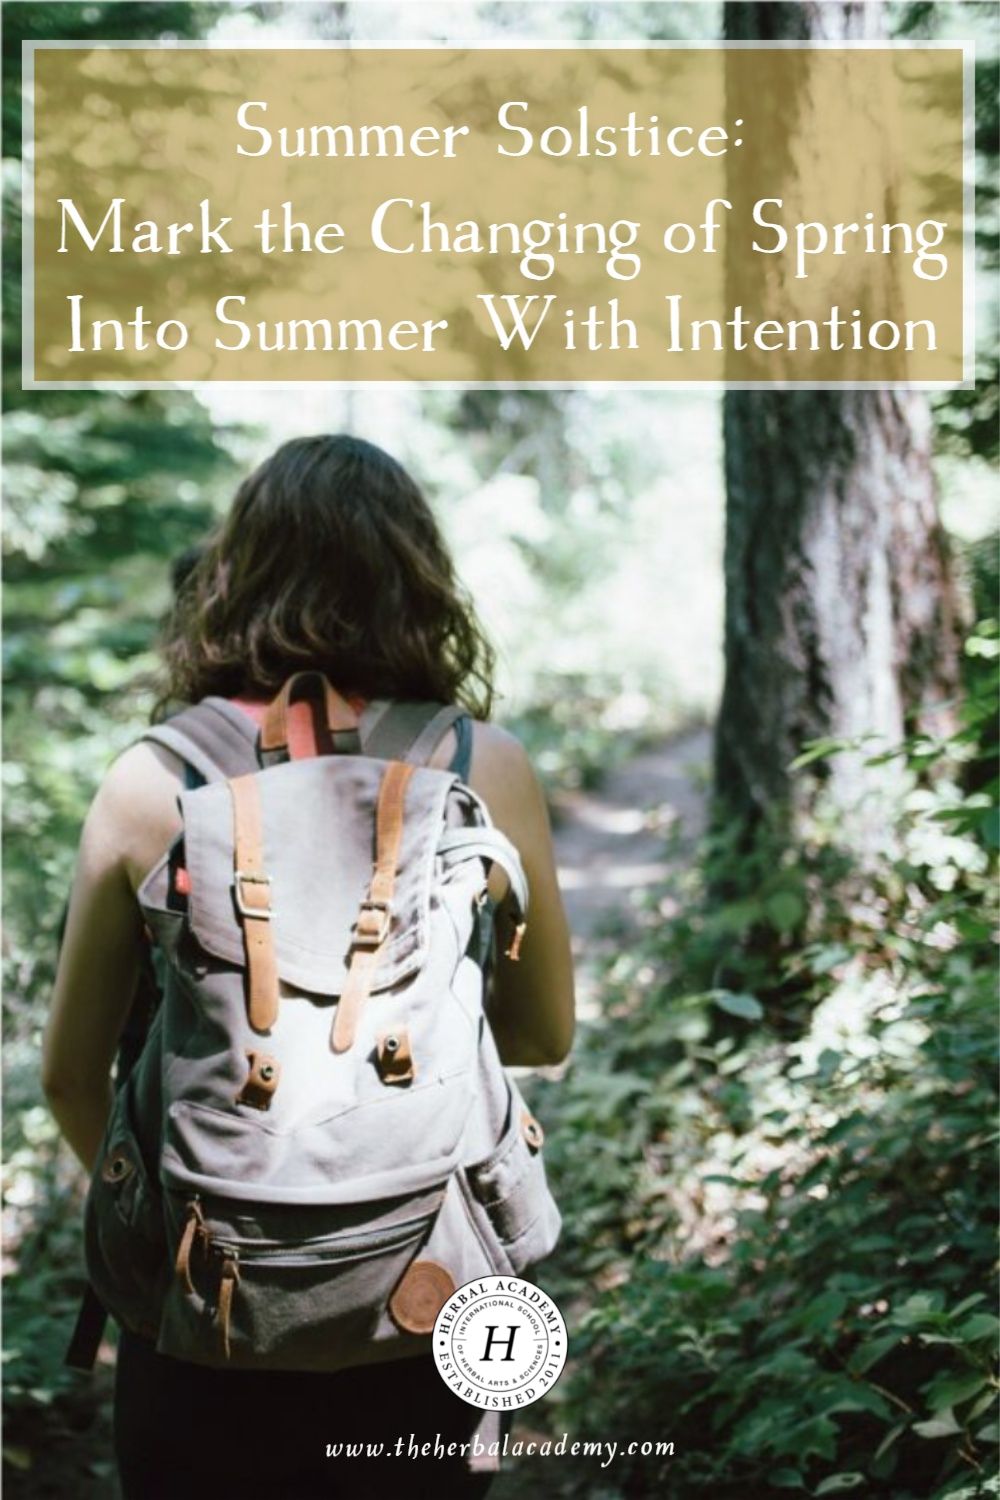 Summer Solstice: Mark the Changing of Spring Into Summer With Intention | Herbal Academy | Let’s look at some ways we can embrace and even ritualize the summer solstice and honor the passing of spring and welcoming of summer.